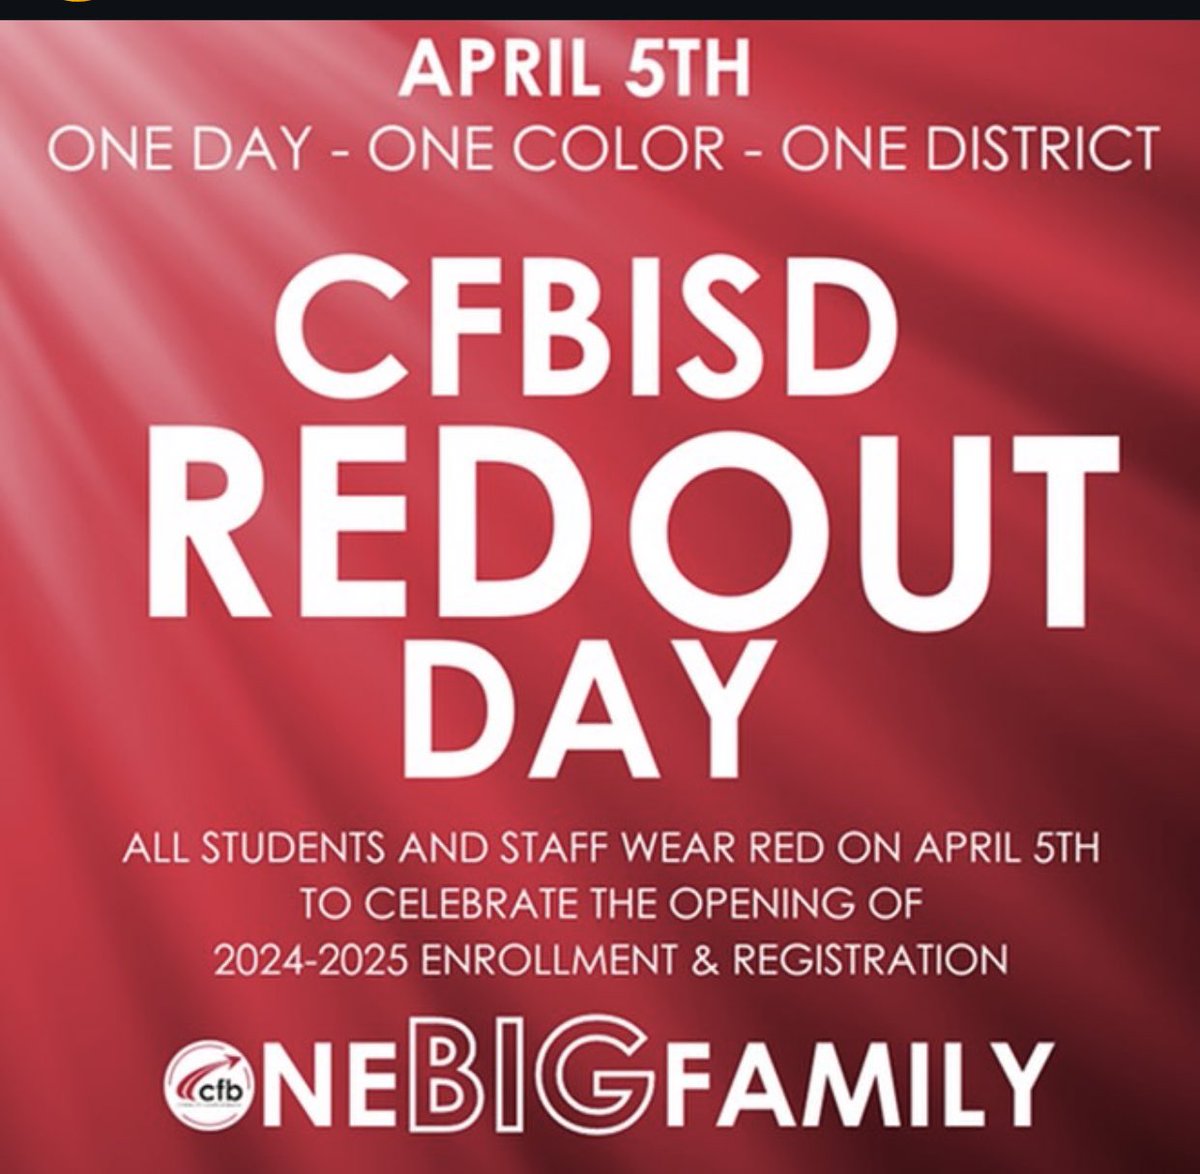 Red out tomorrow, Gator family! Students & staff, let’s show our spirit and support for open enrollment! New chapter starts now - registration is officially open! Don’t miss out - call or message us with any questions! 🐊♥️🌎#enrollmentnowopen @AgueParedes @CFBISD